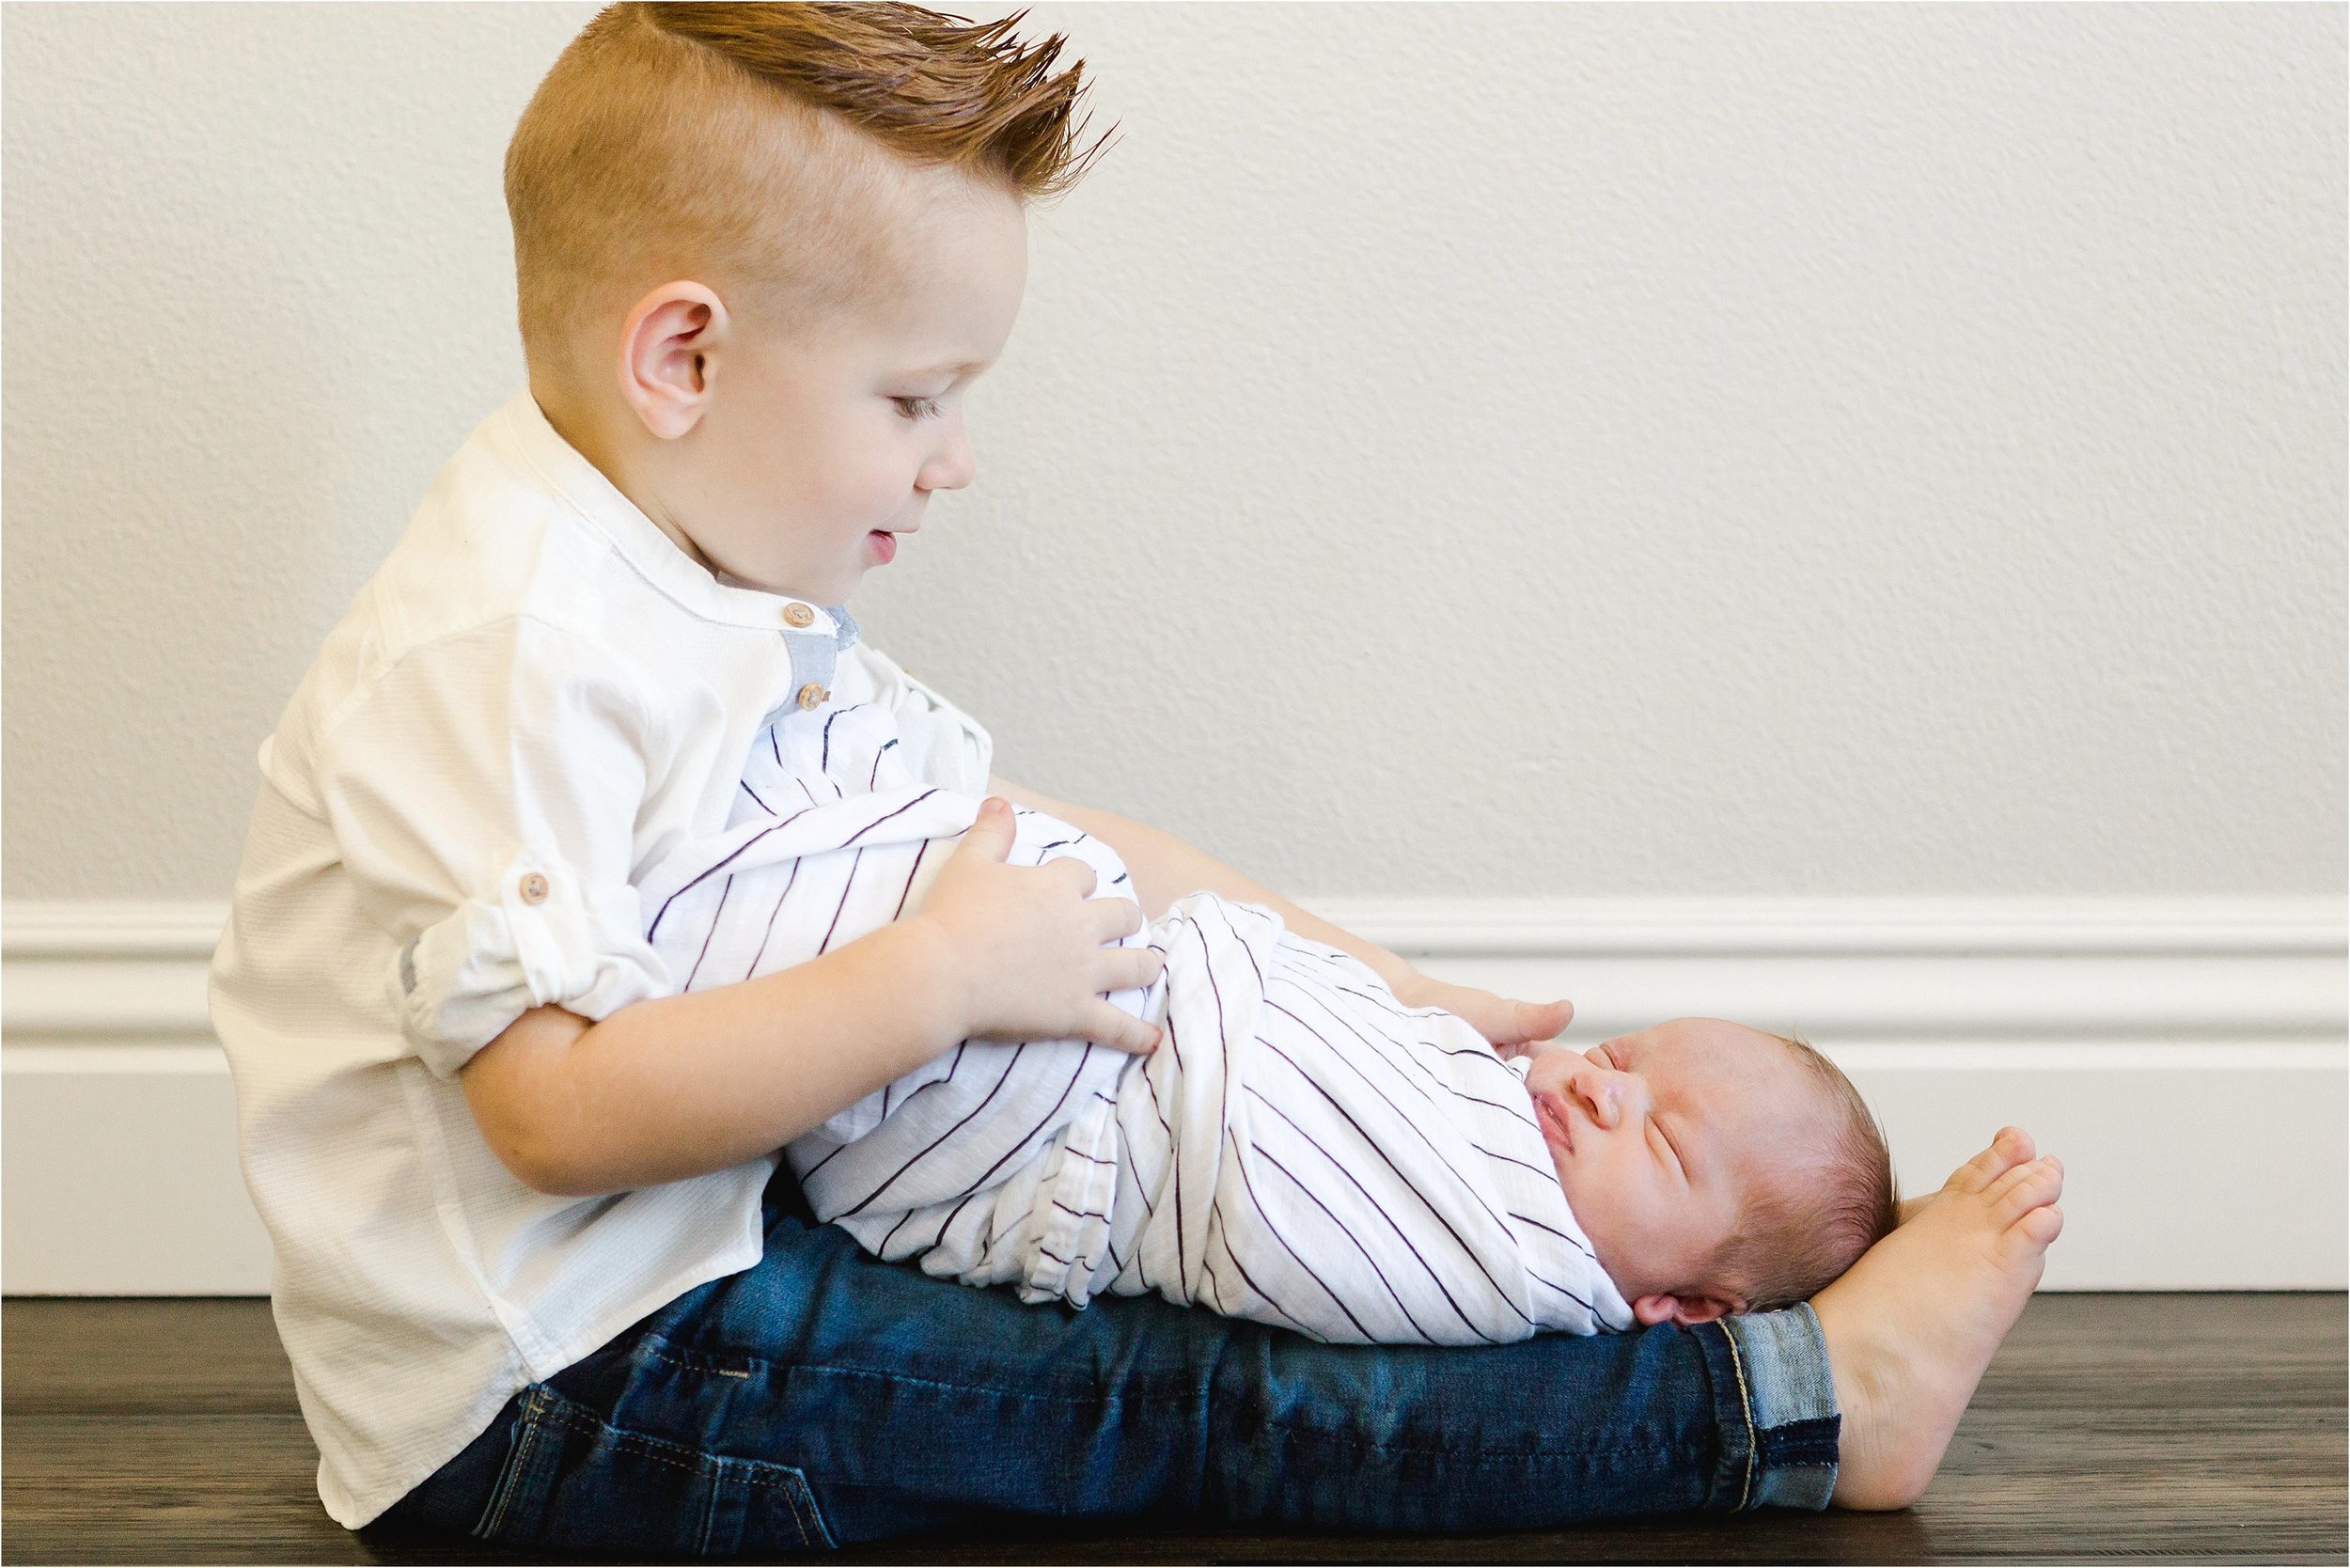 Red-readed big brother sits on the ground with his baby brother lying on his lap.